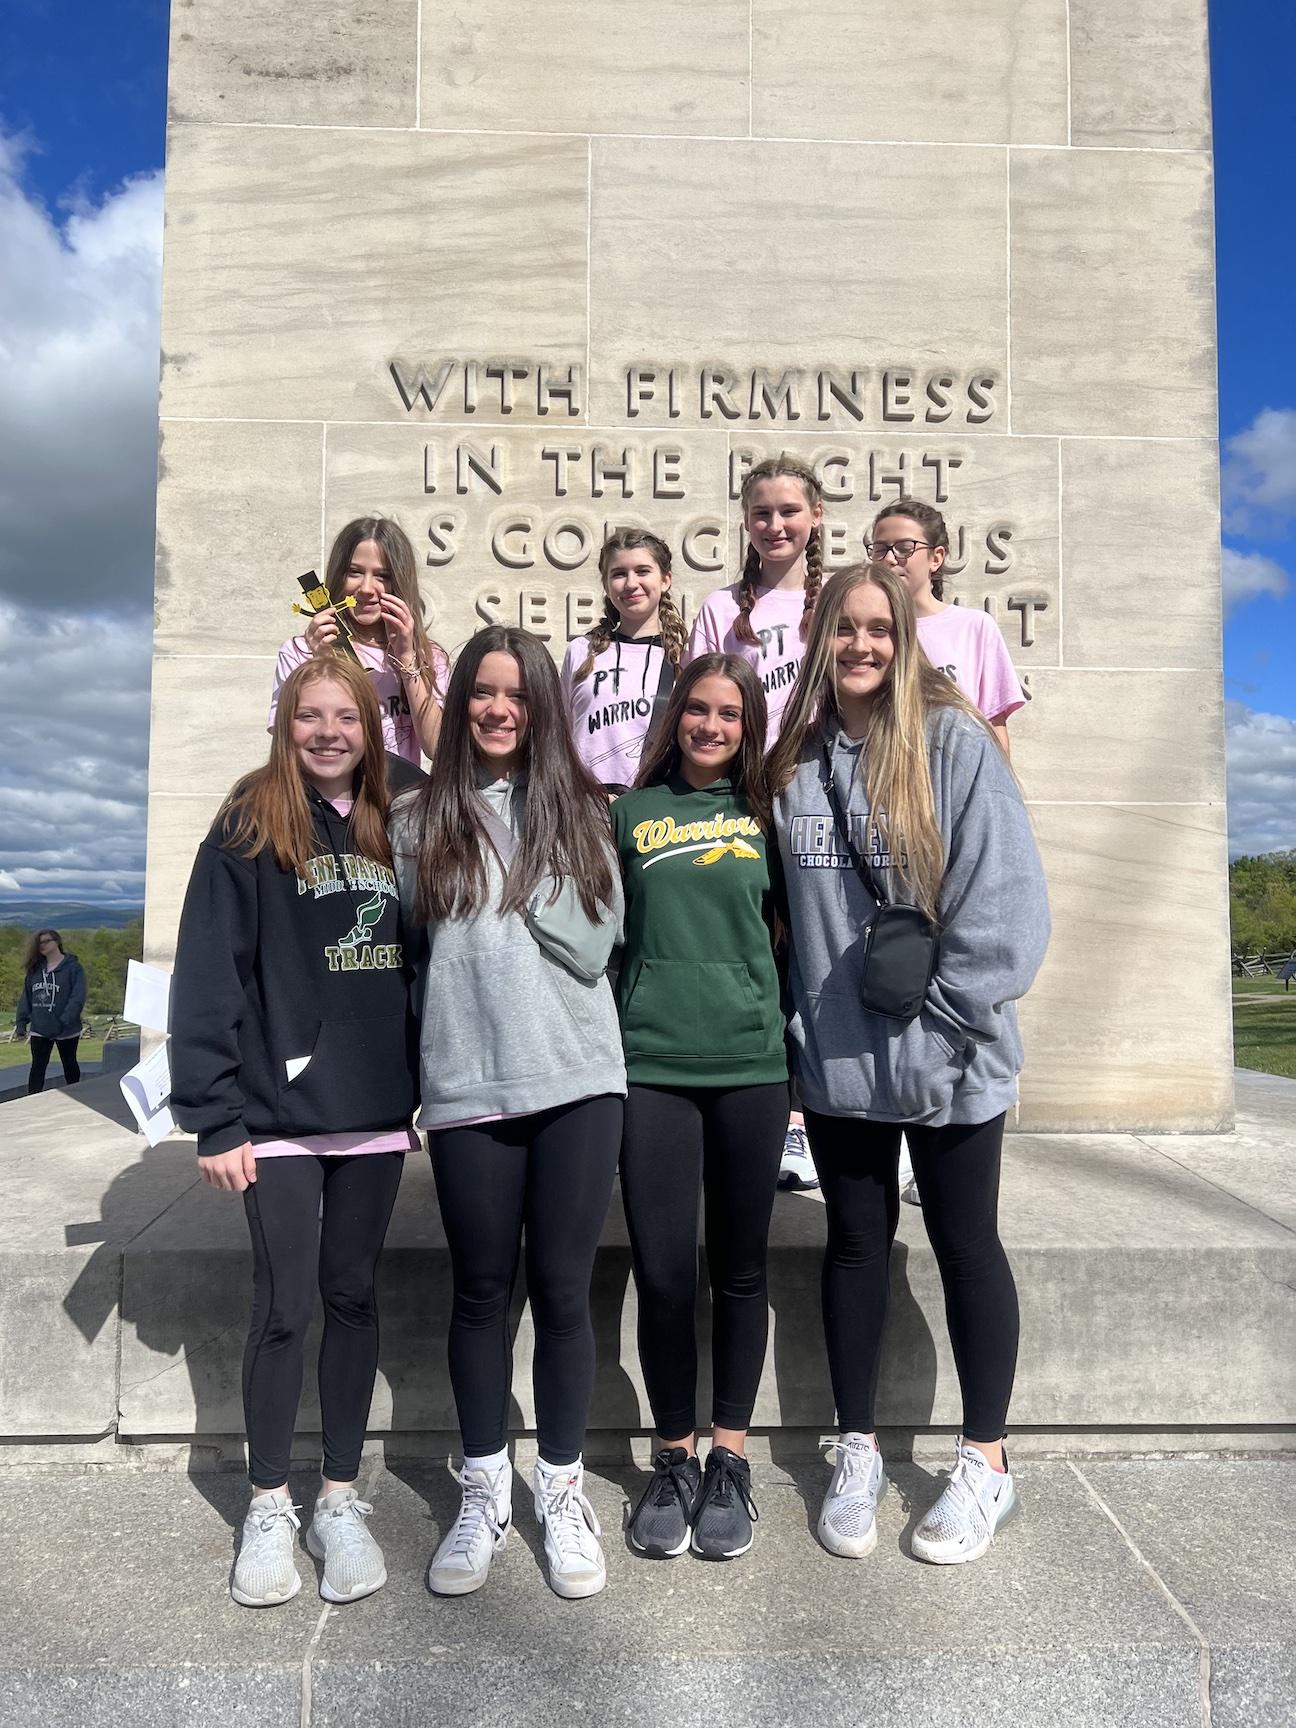 Gathered at the Eternal Light Peace Memorial are Trafford students (front) Sydney Gill, Ava Cafaro, Teresa Fiori, and Josie Schubert, (back) Charlie Thomas, Adele Lee, Ryleigh Susalla, and Haleigh Weagraff